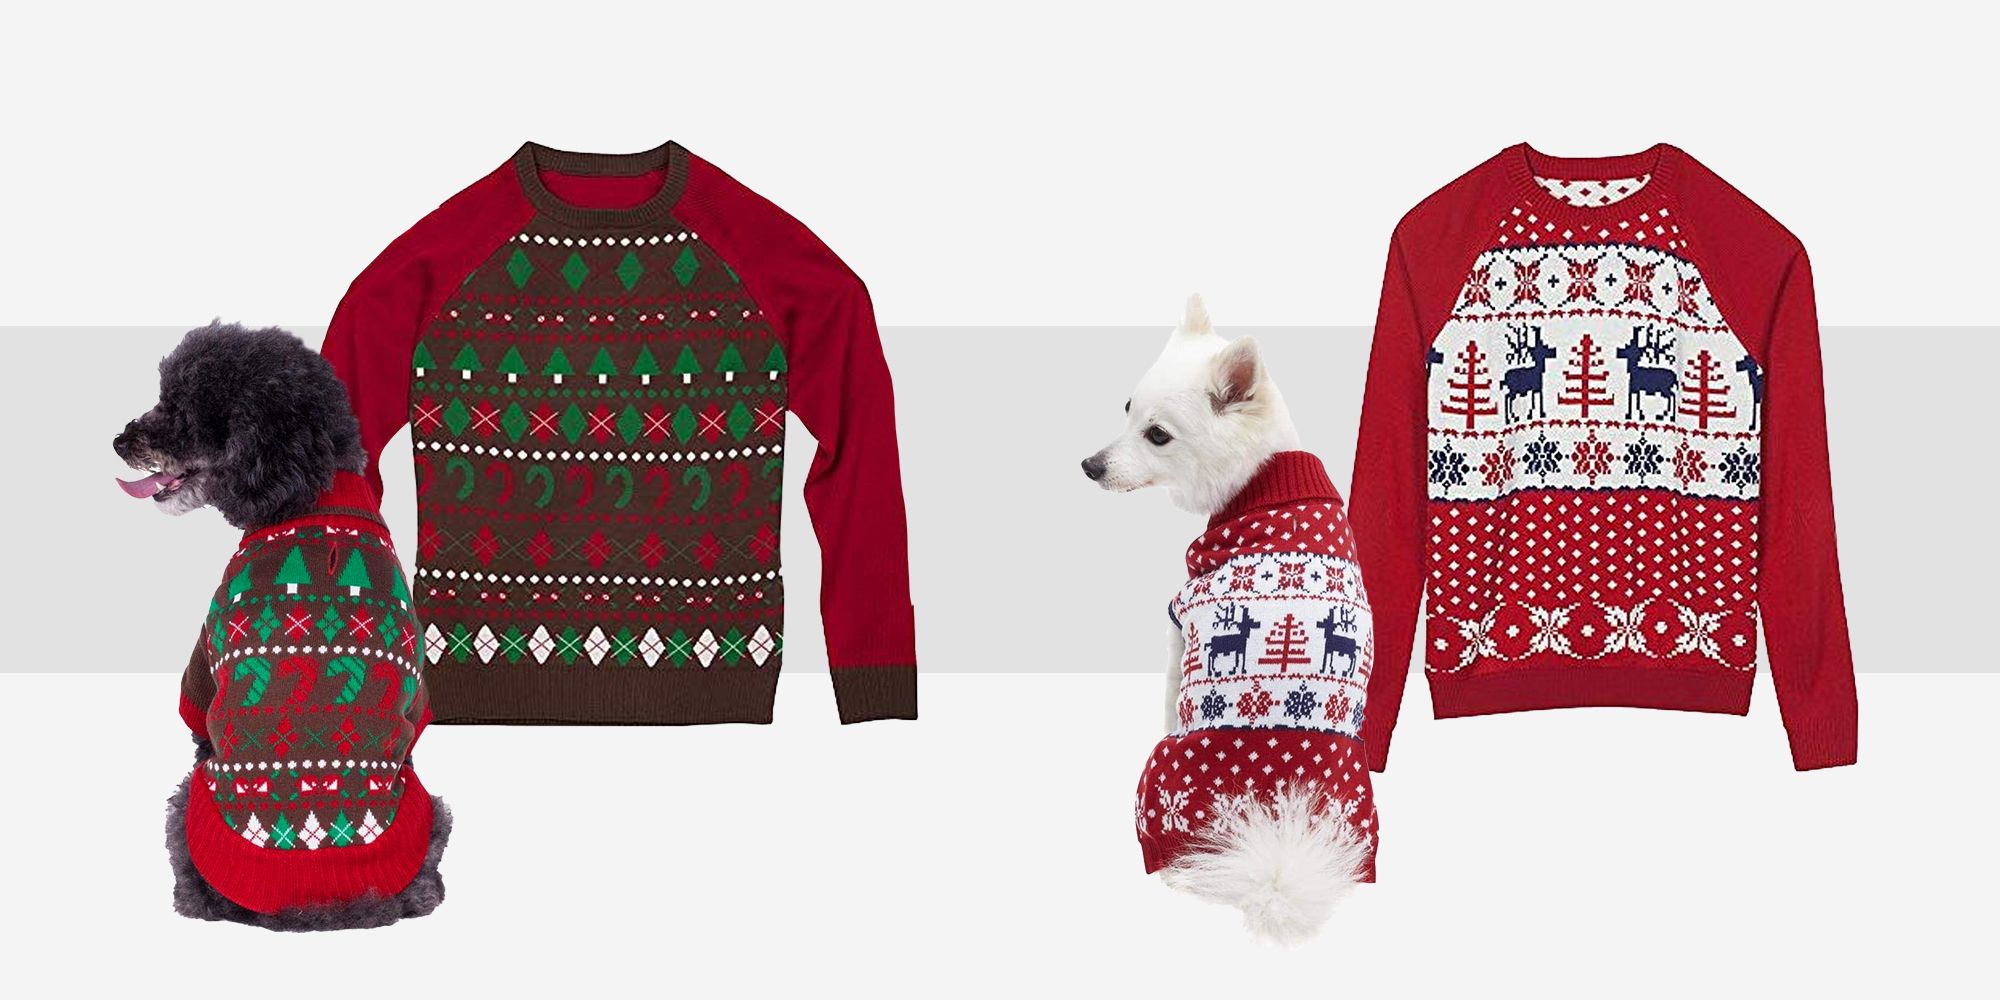 XXS Cuteboom Holiday Xmas Reindeer Sweaters Dog Sweaters Year Christmas Sweater Pet Clothes for Small Dog and Cat 